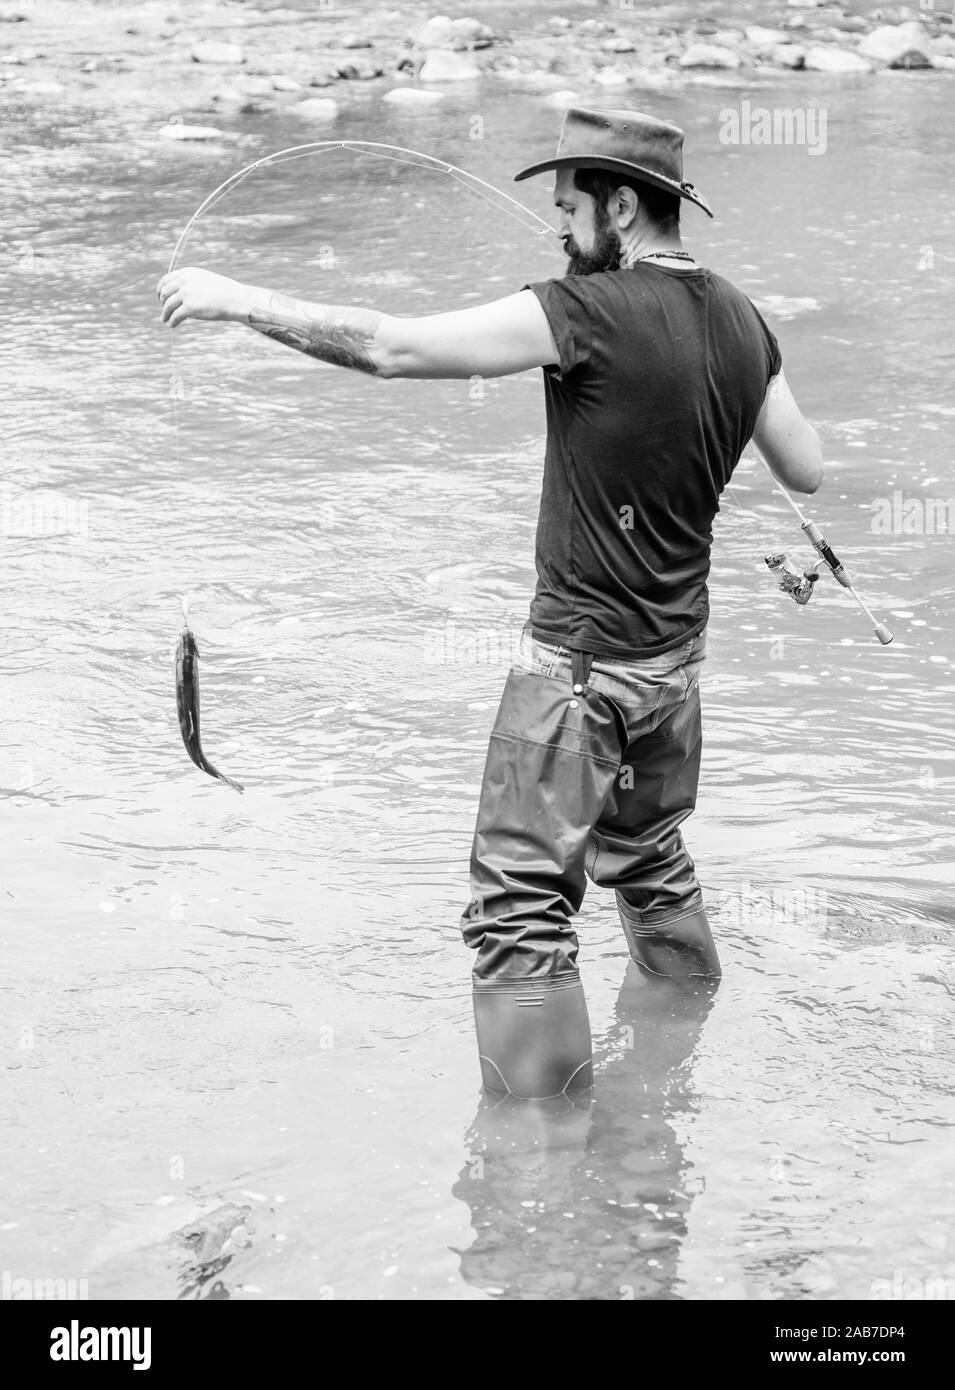 Fishing masculine hobby. Brutal man wear rubber boots stand in river water. Fisher weekend activity. Fisher with fishing equipment. Fish on hook. Leisure in wild nature. Fun of fishing is catching. Stock Photo